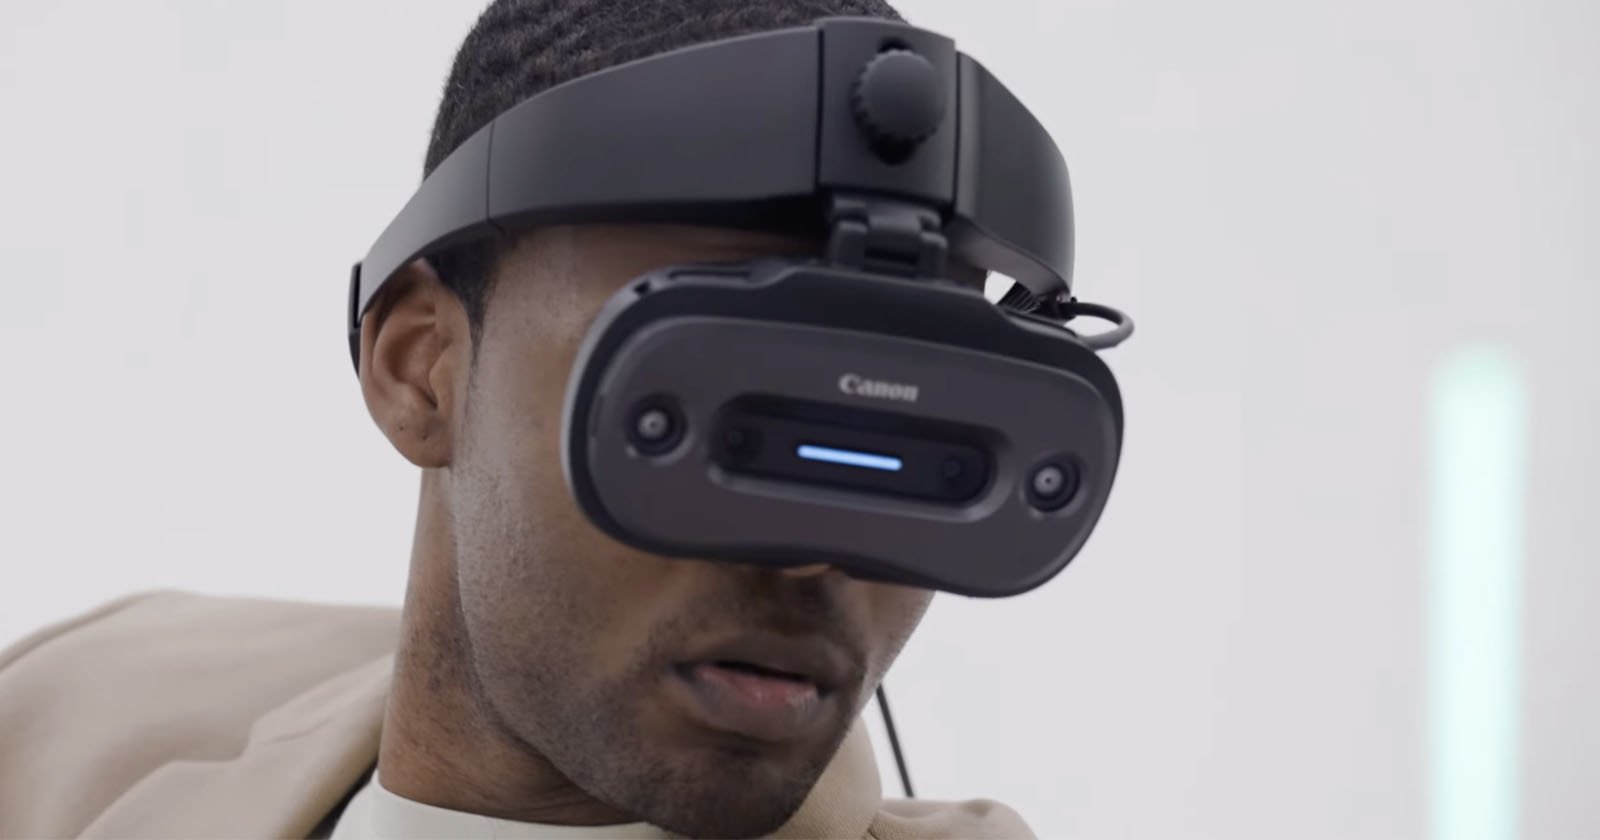  canon mreal headset fuses reality real-time 